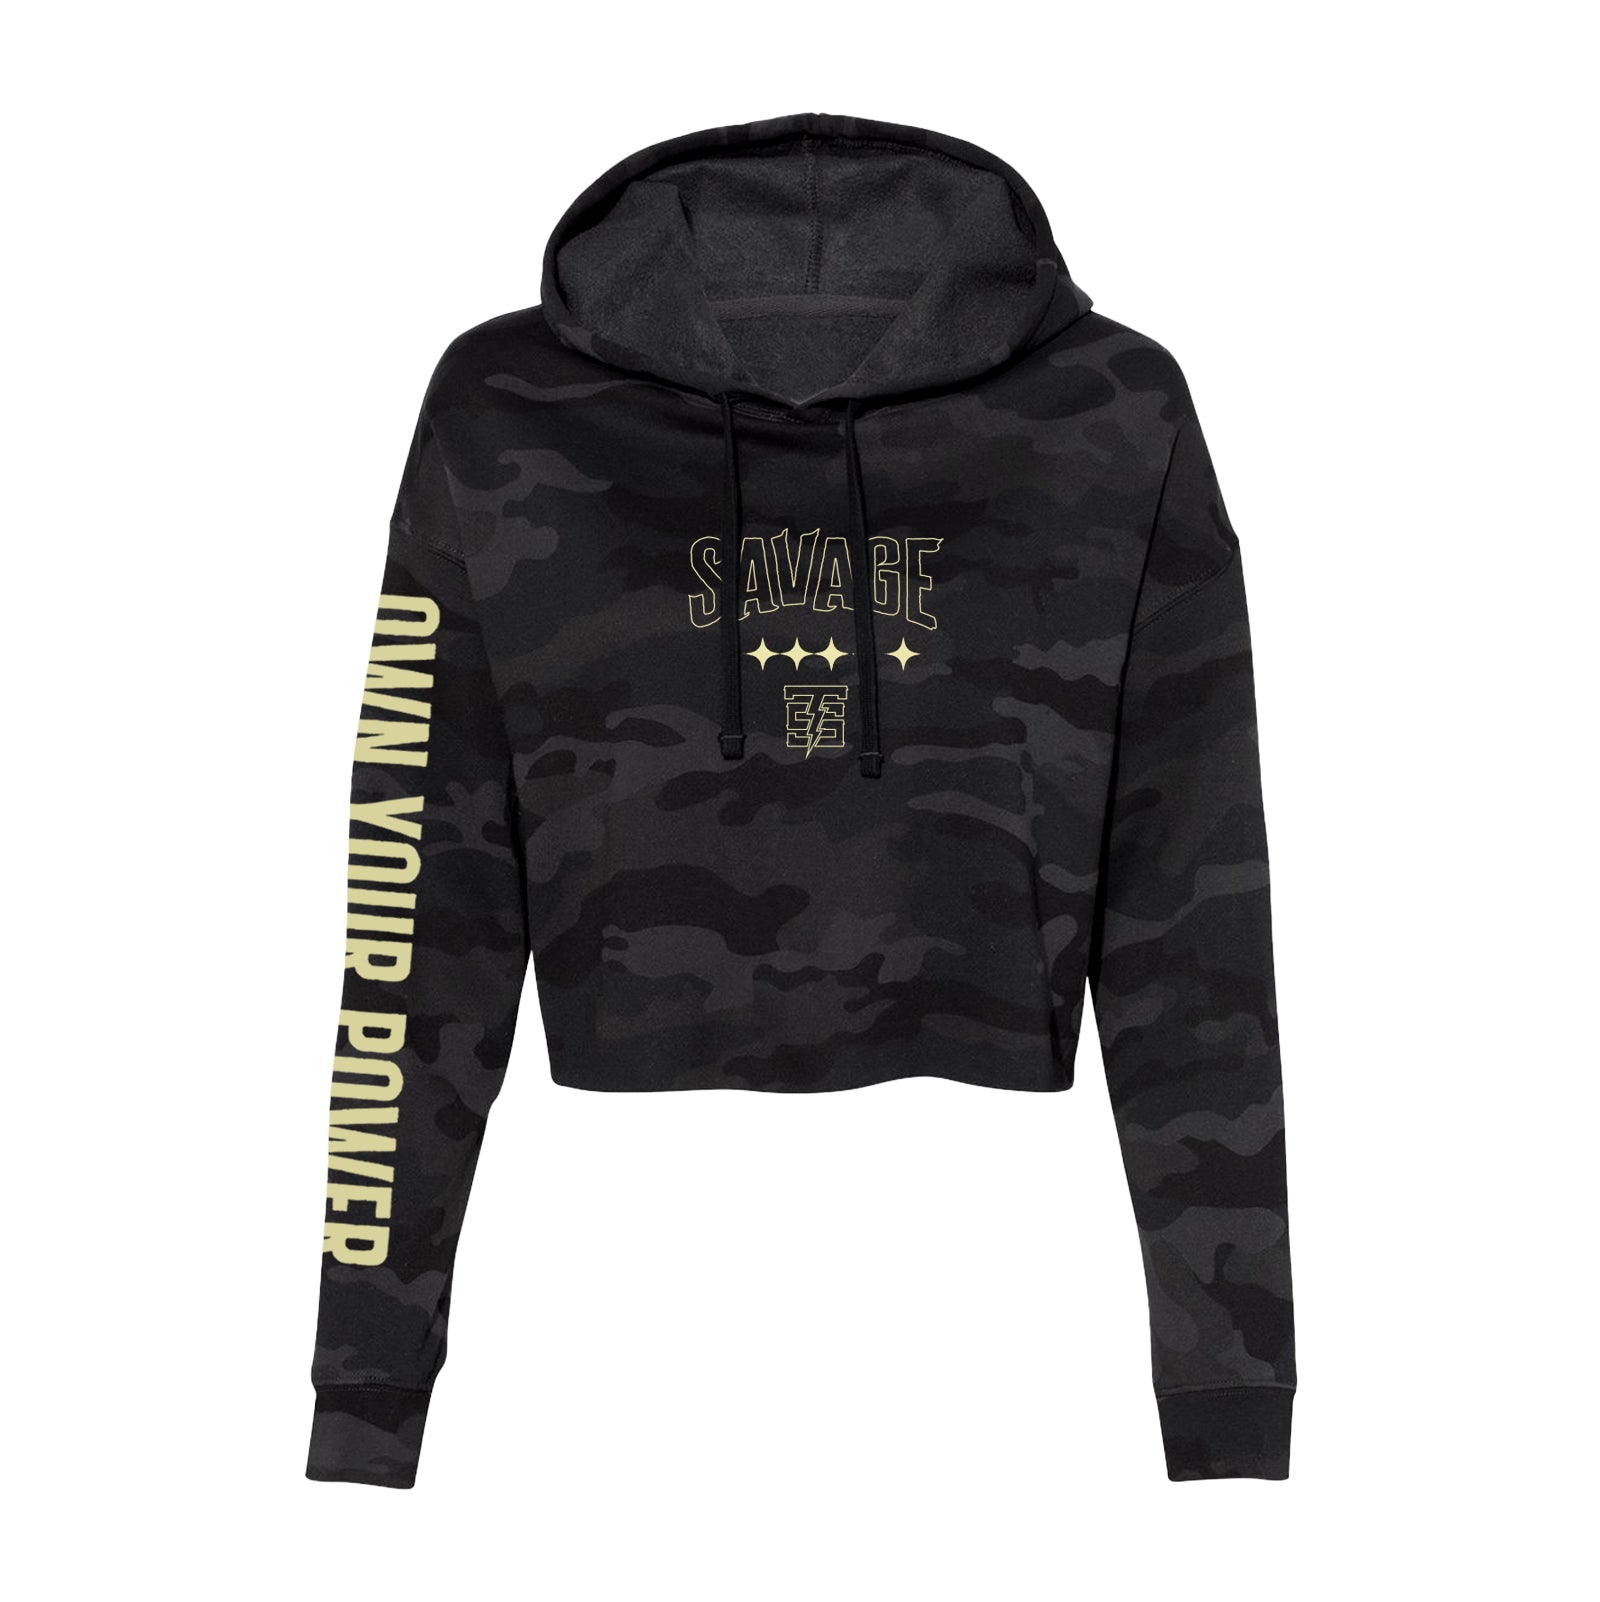 Own Your Power Crop Hoodie: Black Camouflage